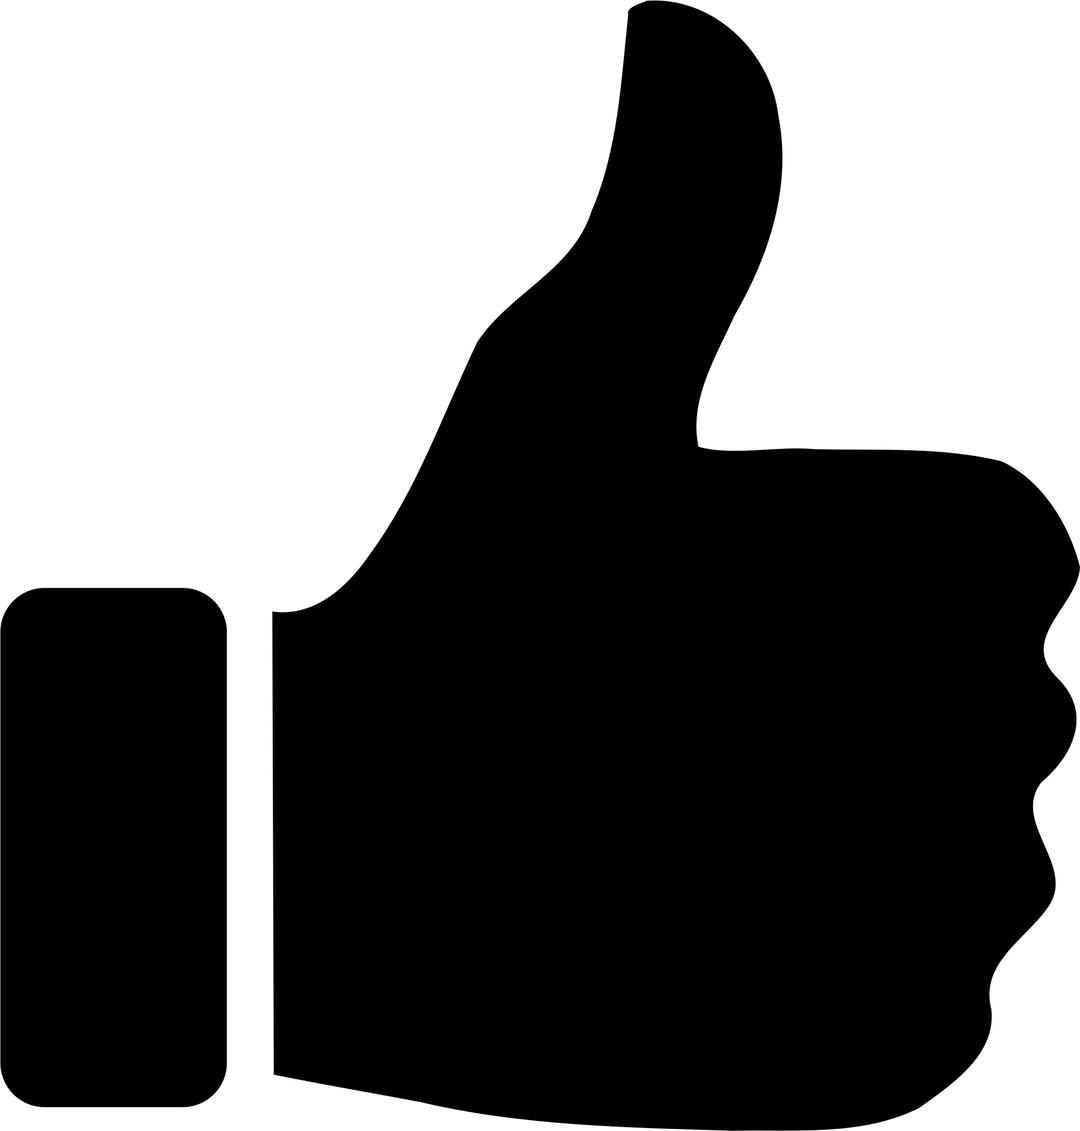 Thumbs-Up Silhouette Cleaned Up png transparent